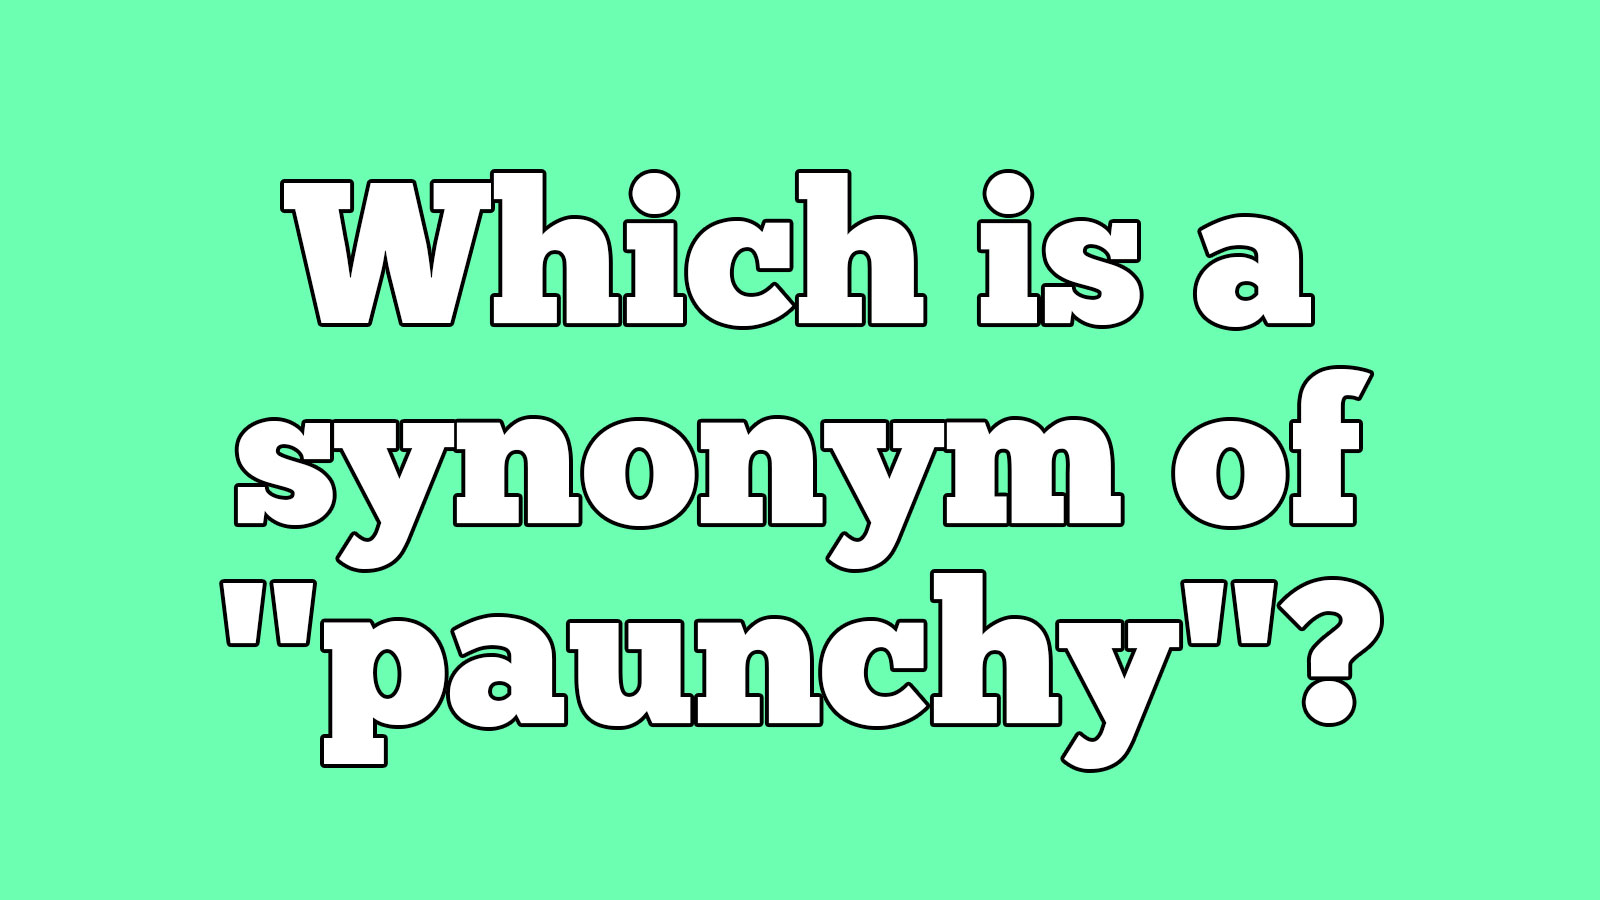 Can You Beat the Average Person in This English Word Quiz? 731